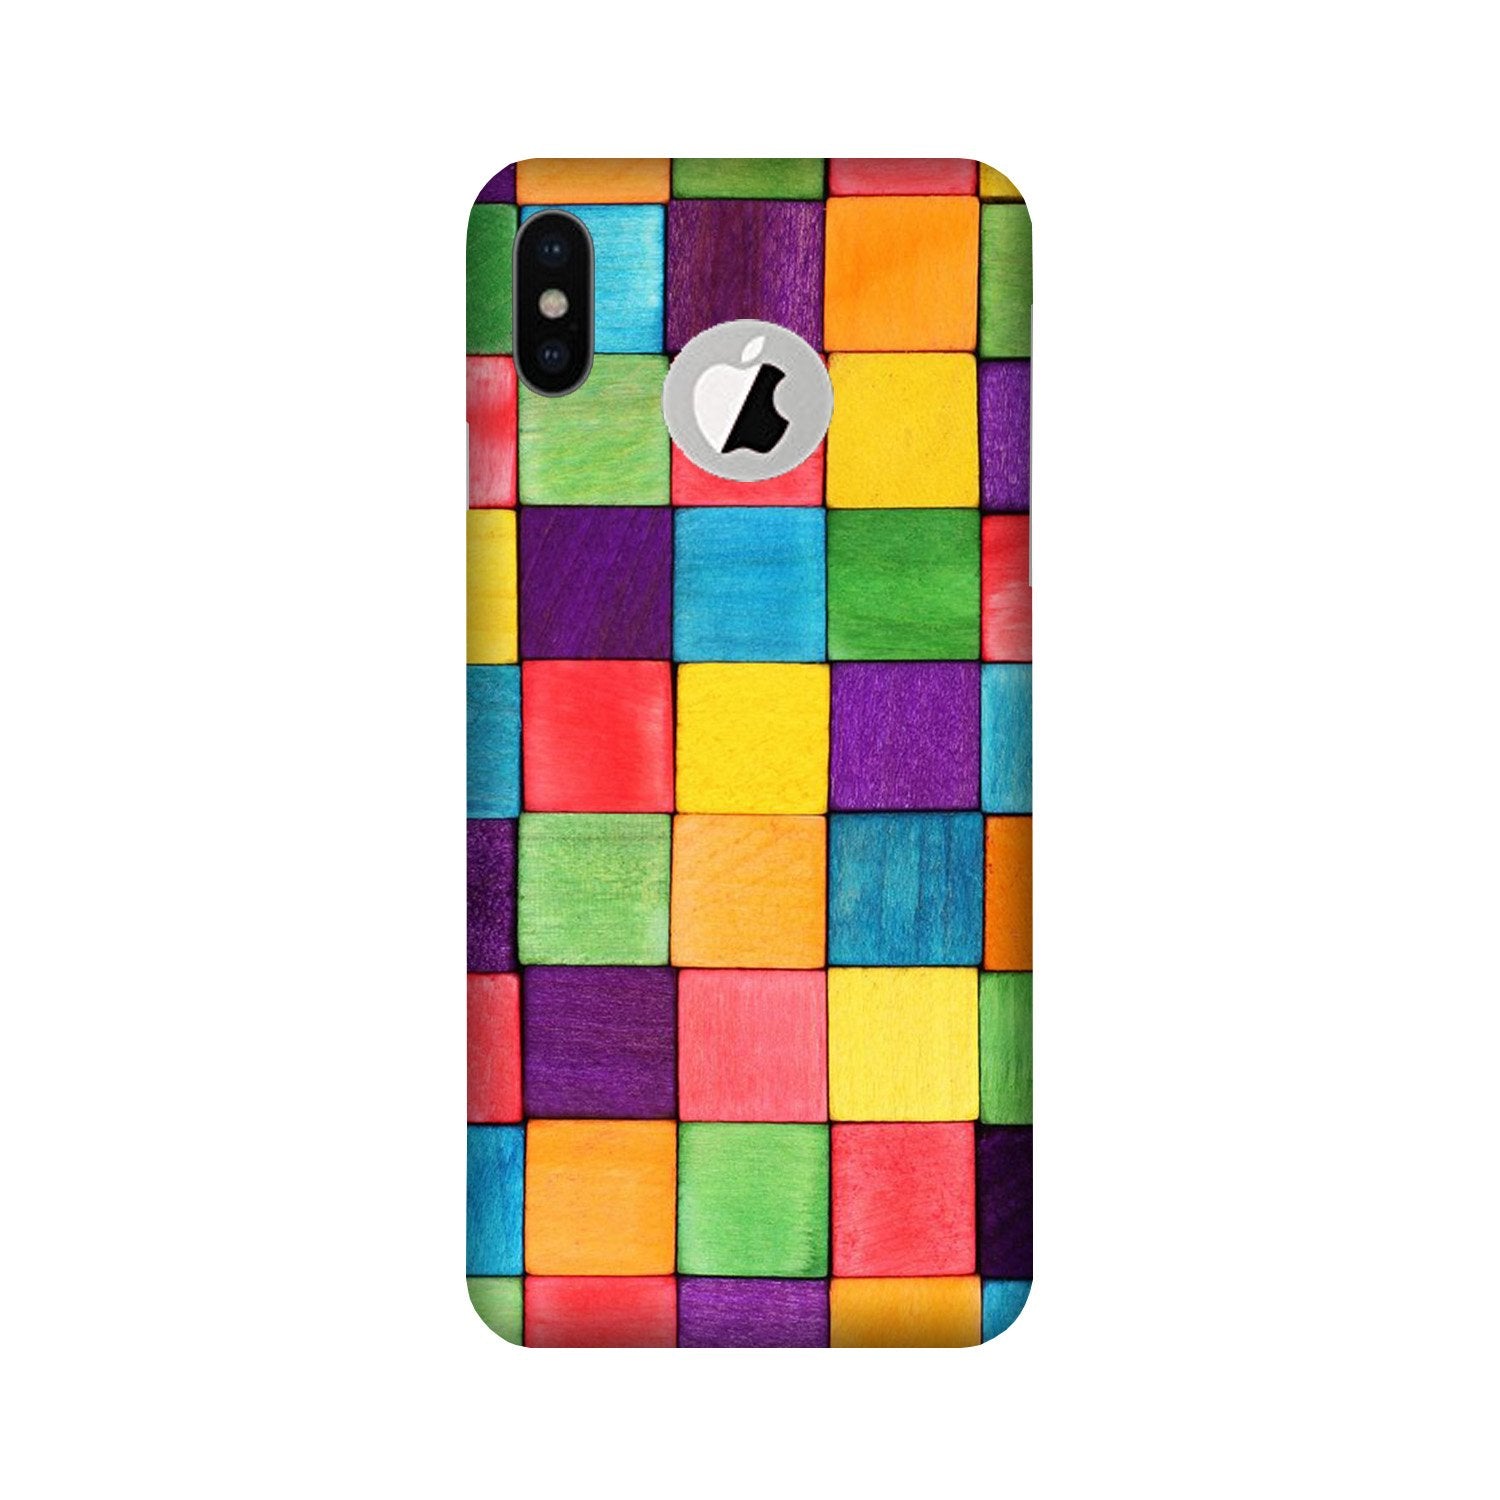 Colorful Square Case for iPhone Xs logo cut  (Design No. 218)